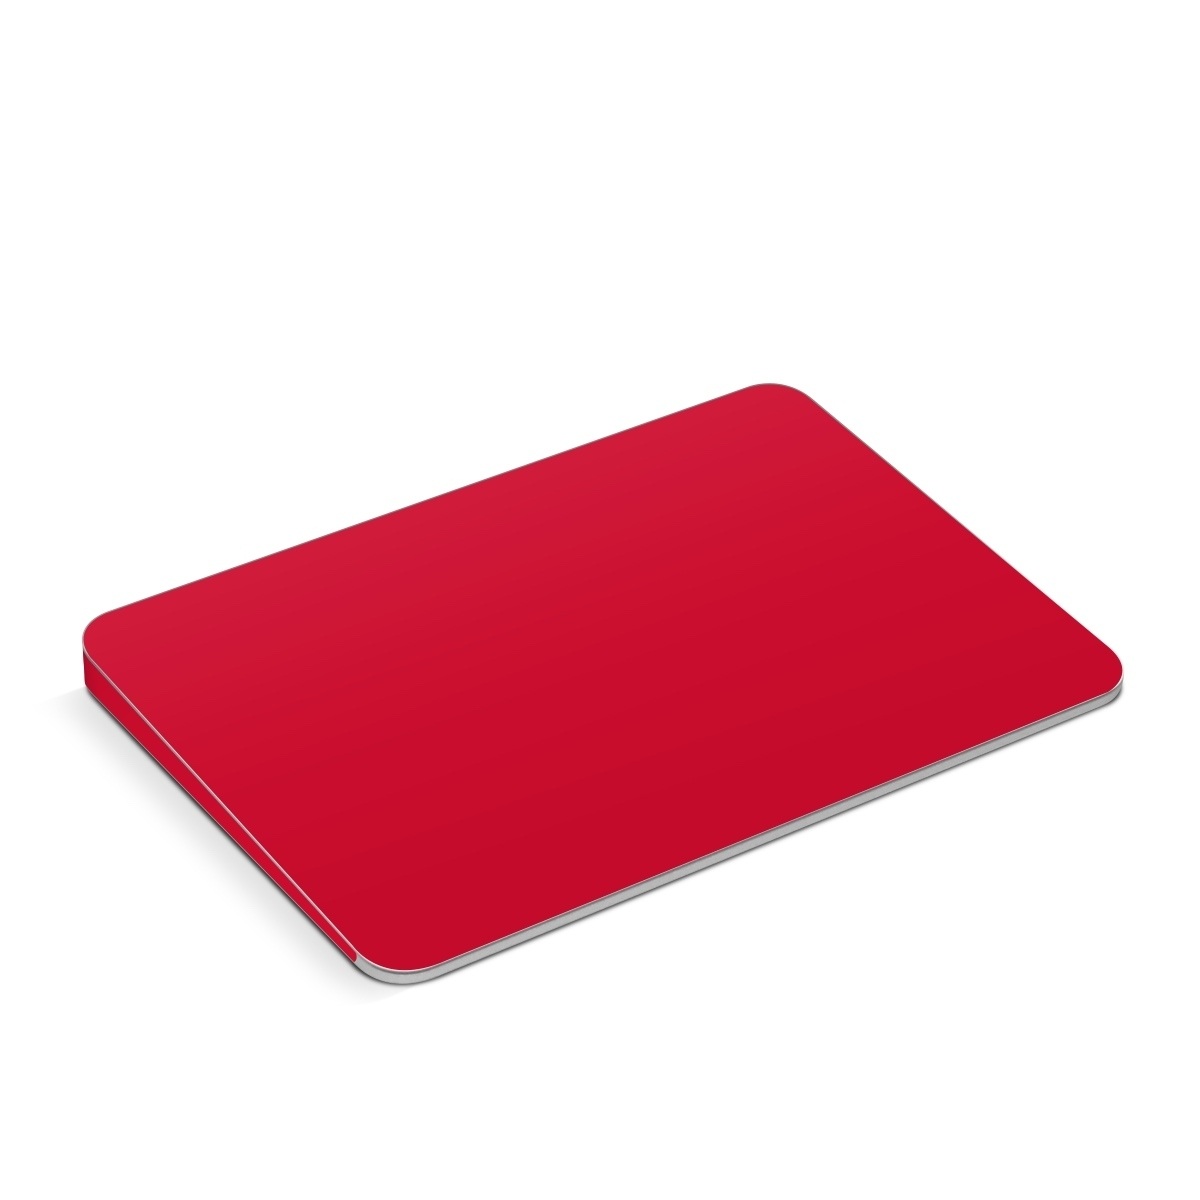 Magic Trackpad Skin - Solid State Red (Image 1)